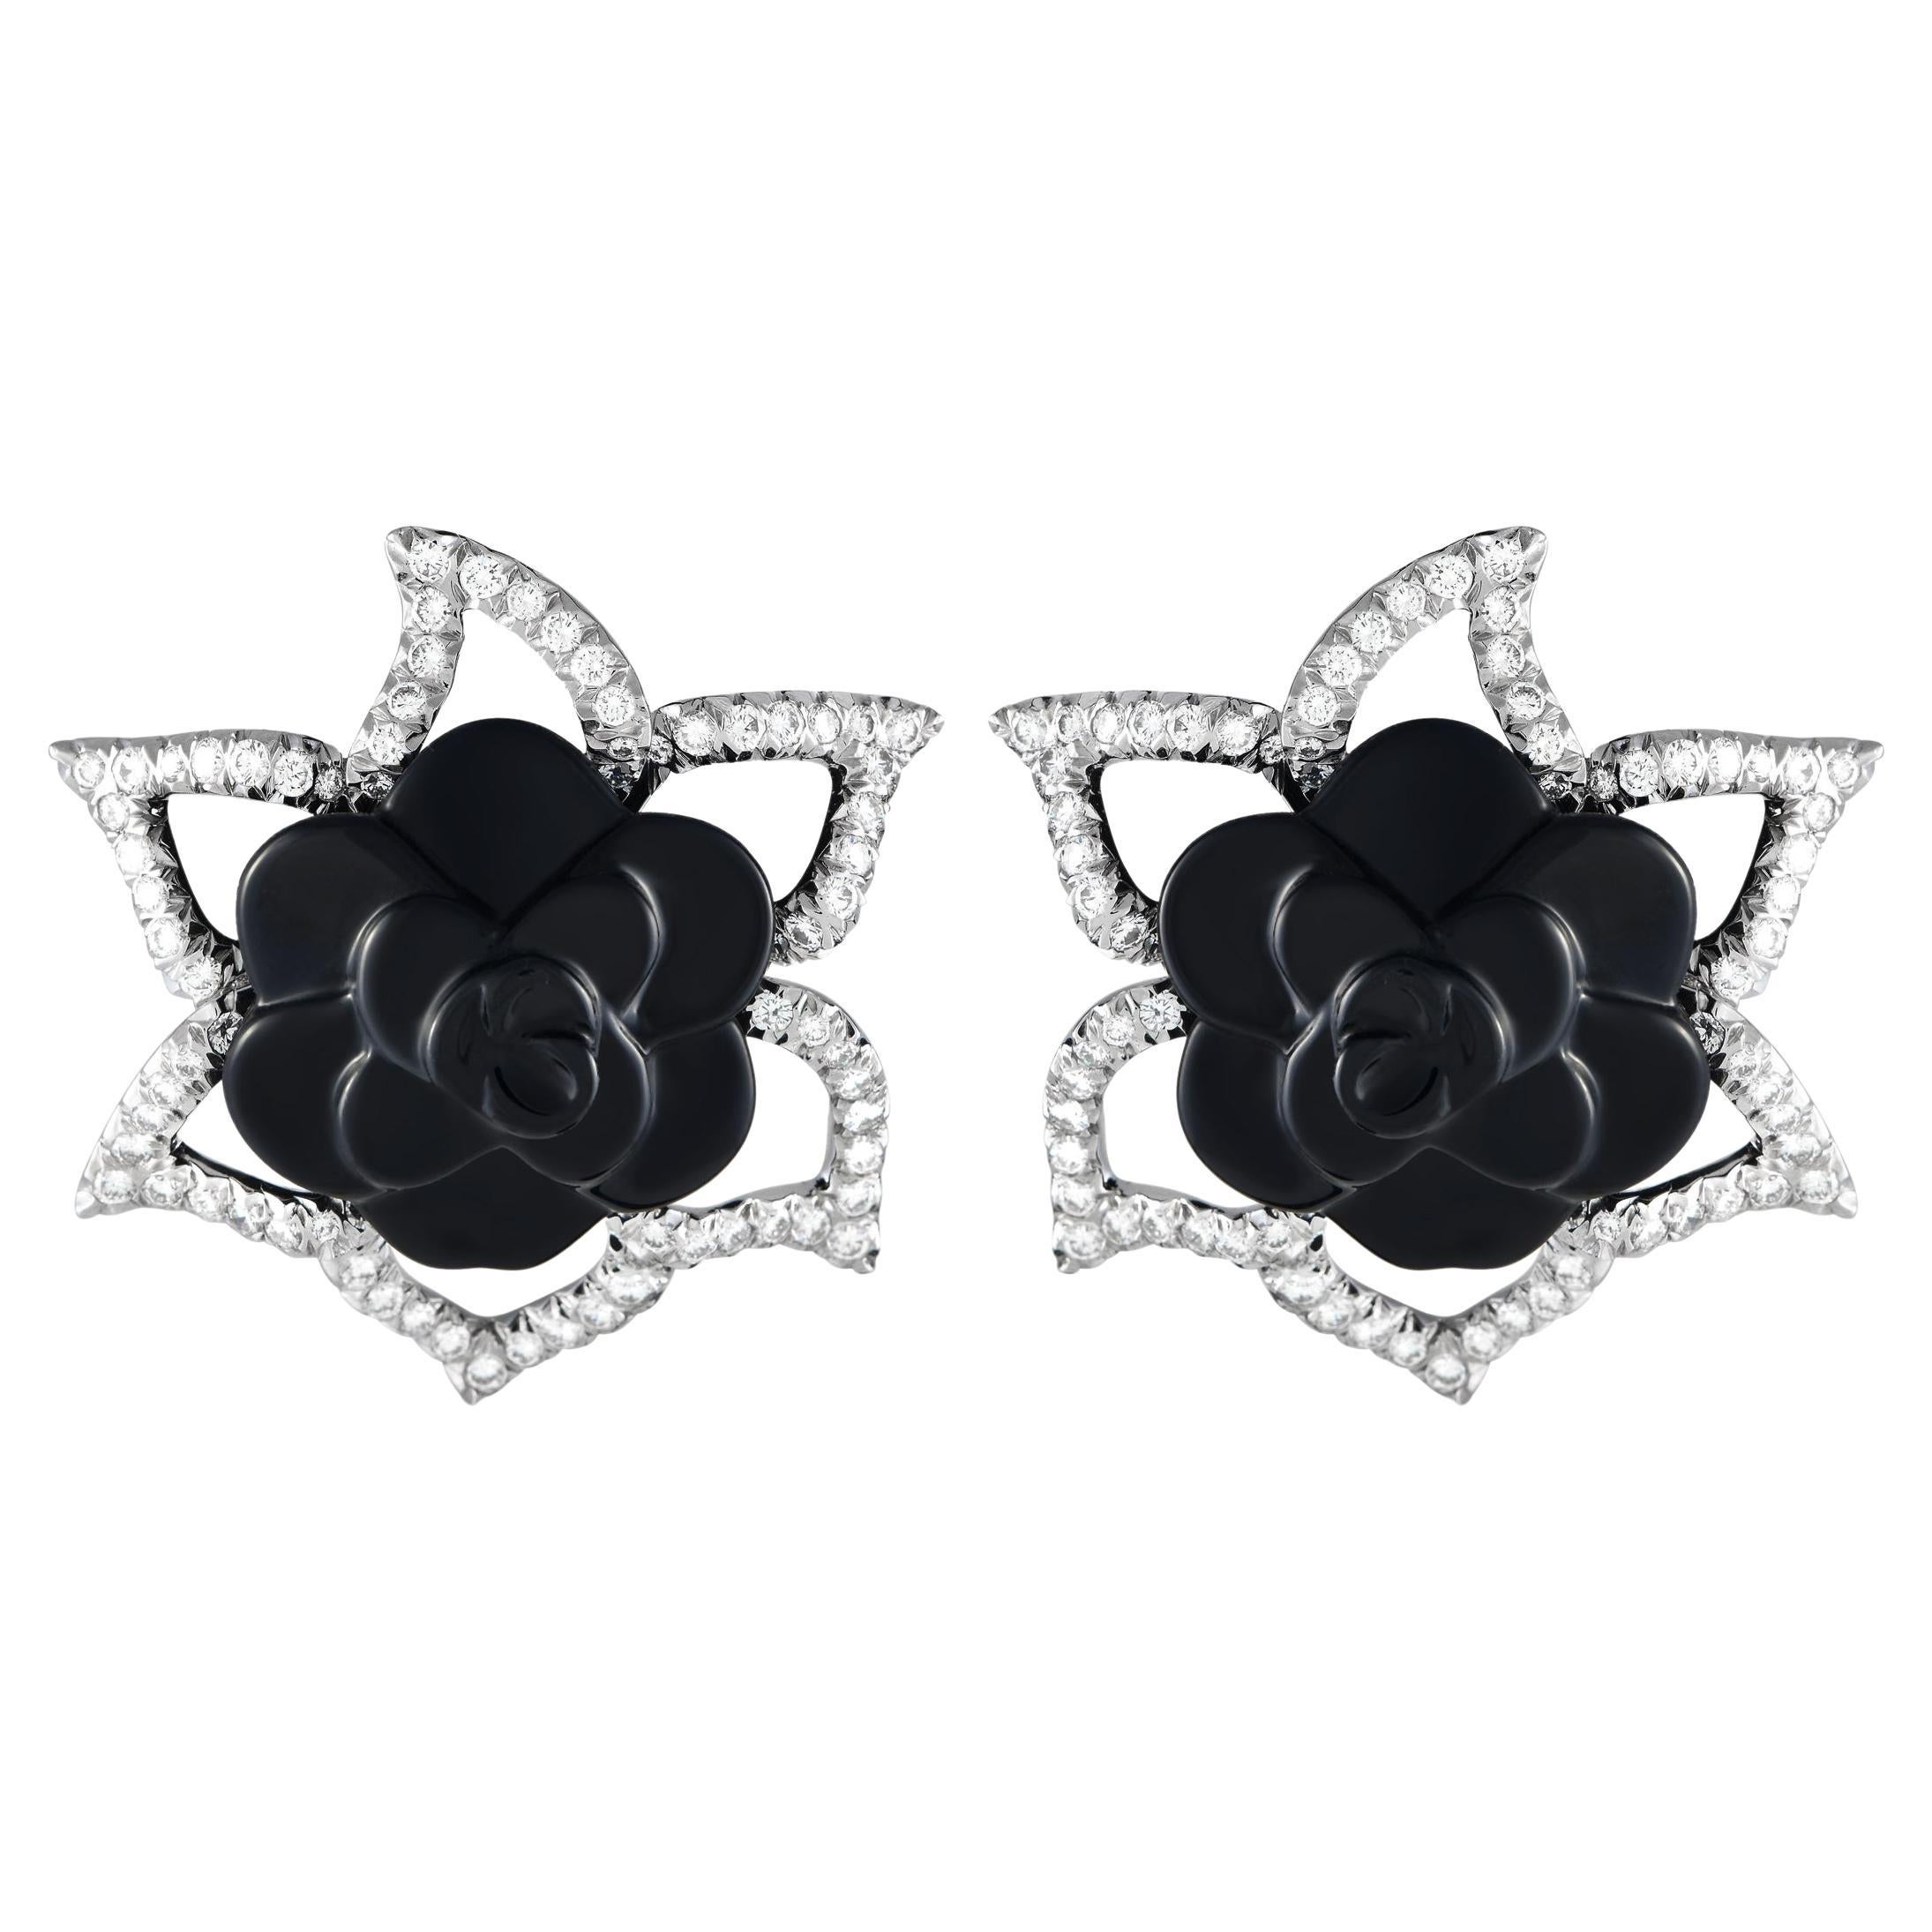 Chanel Camellia 18K White Gold 3.65ct Diamond and Onyx Flower Earrings For Sale